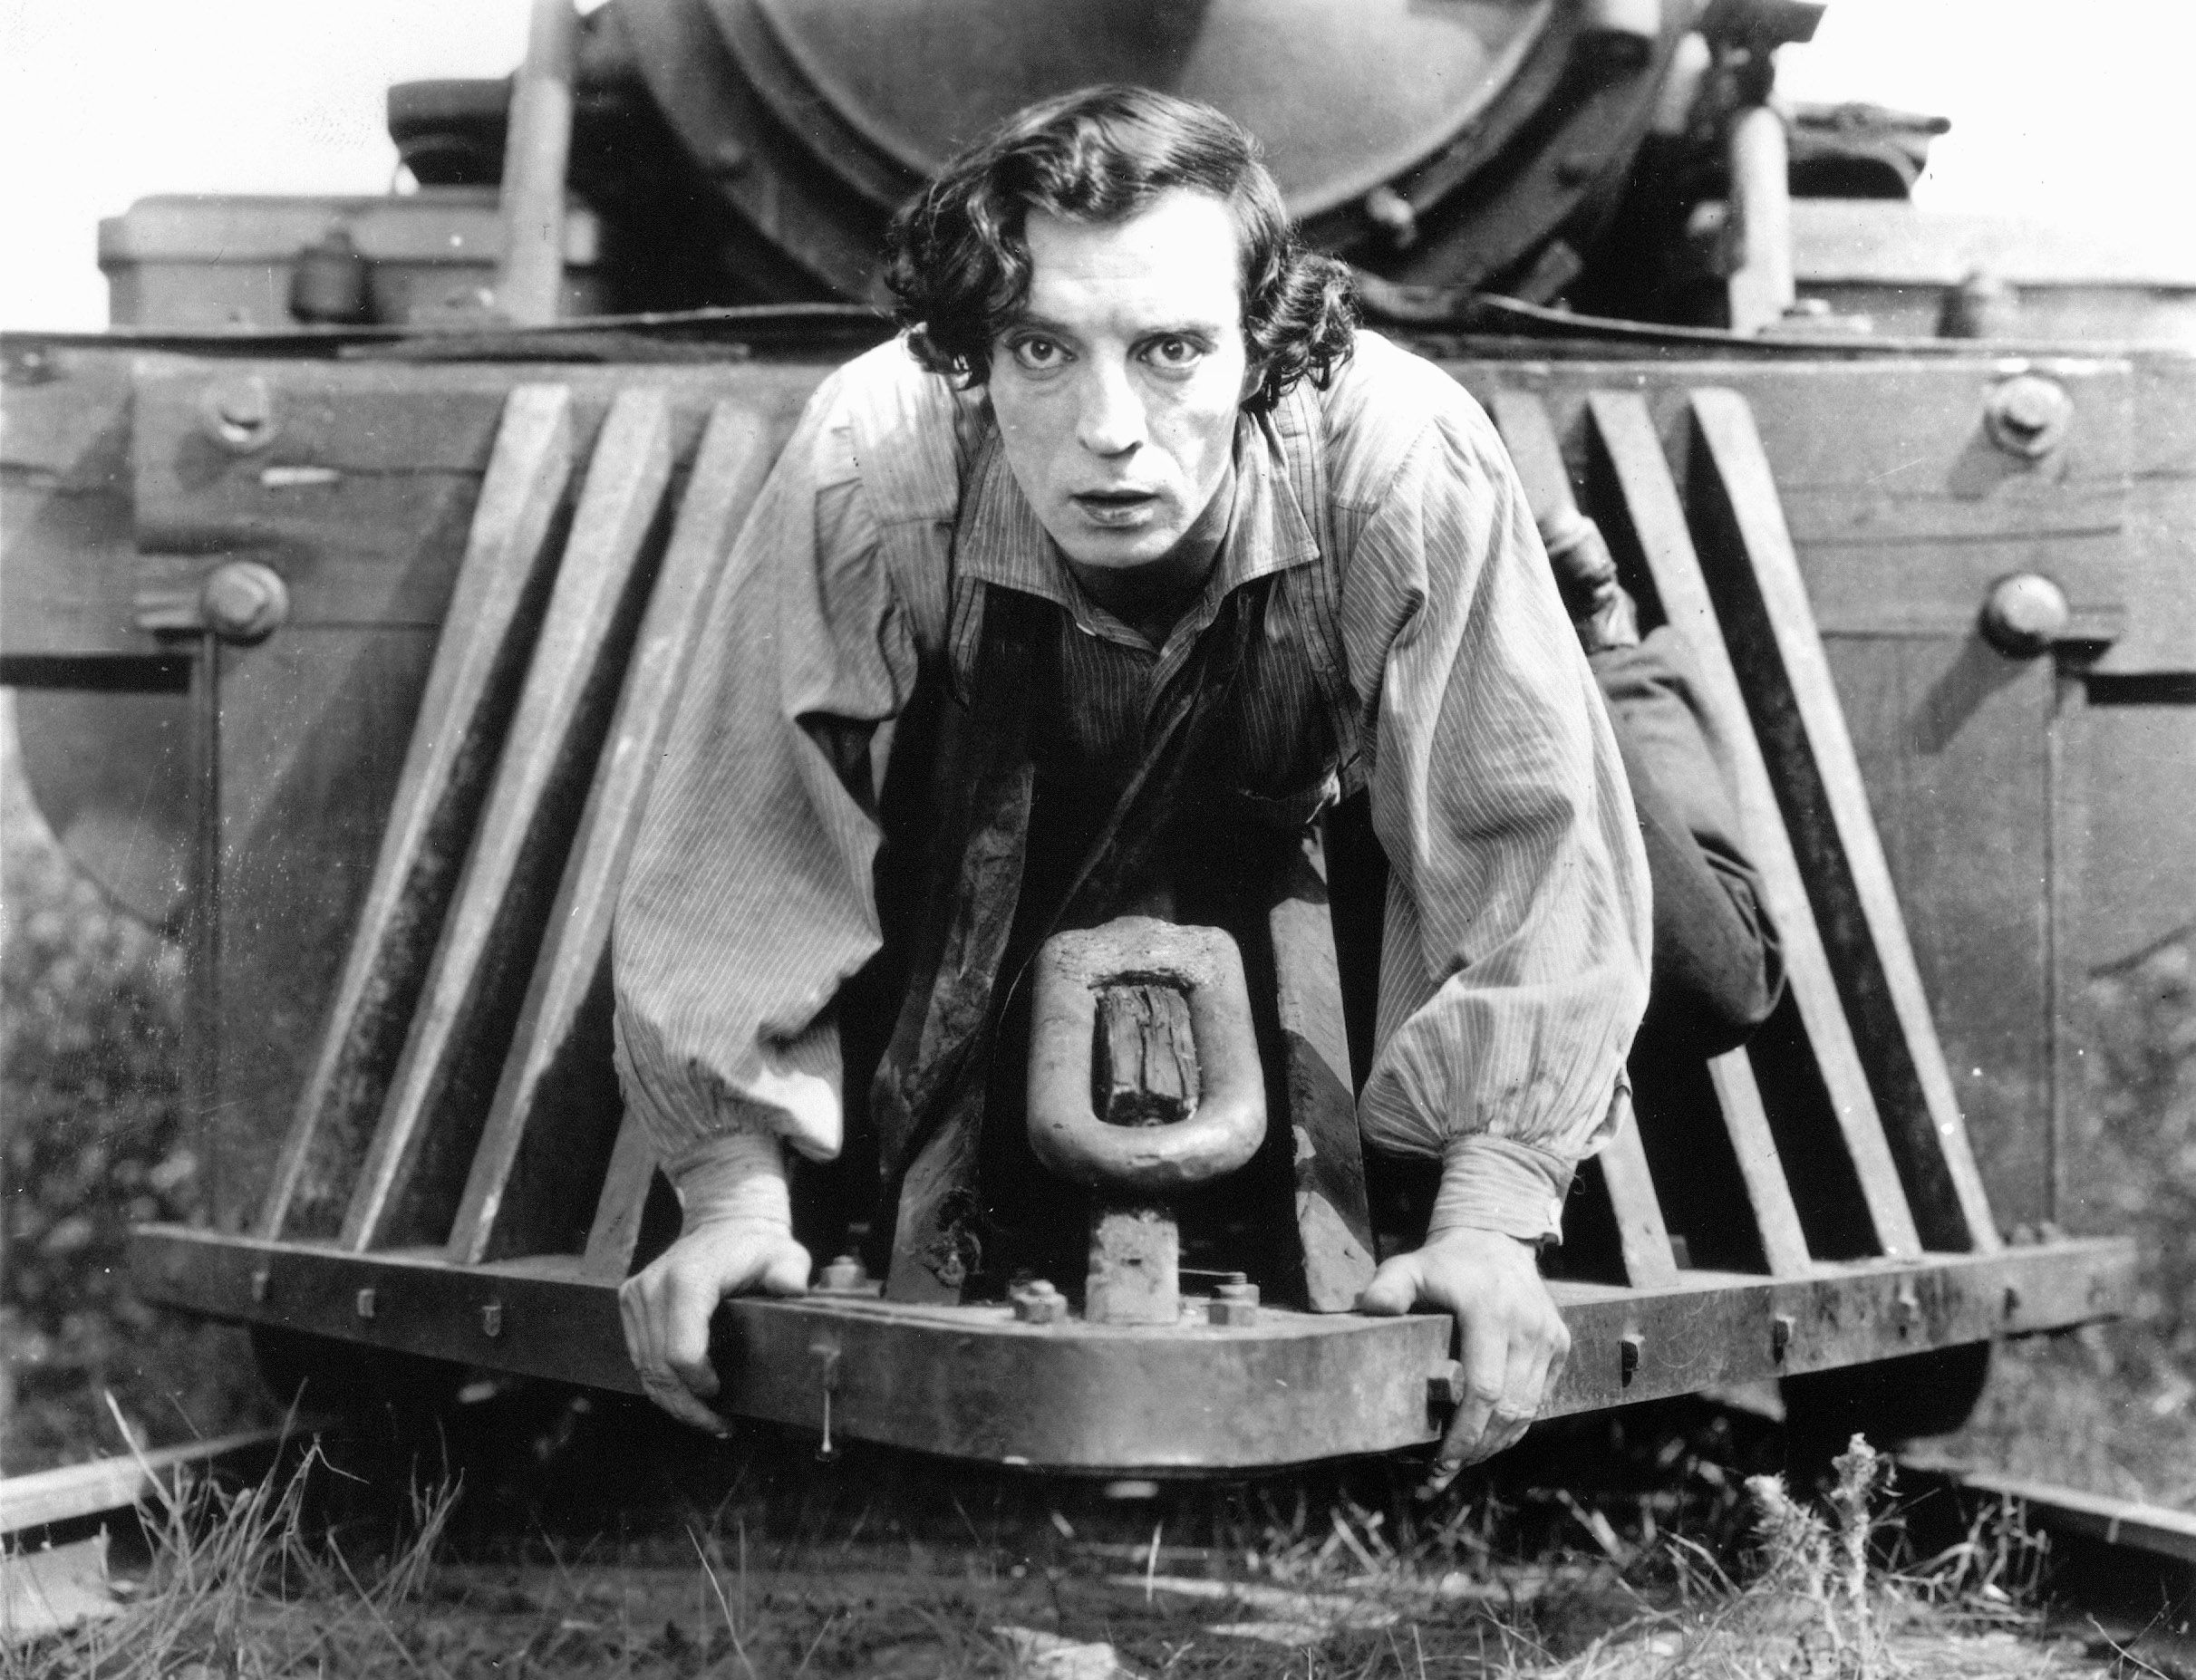 Criticwire Classic of the Week: Buster Keaton's 'The General'